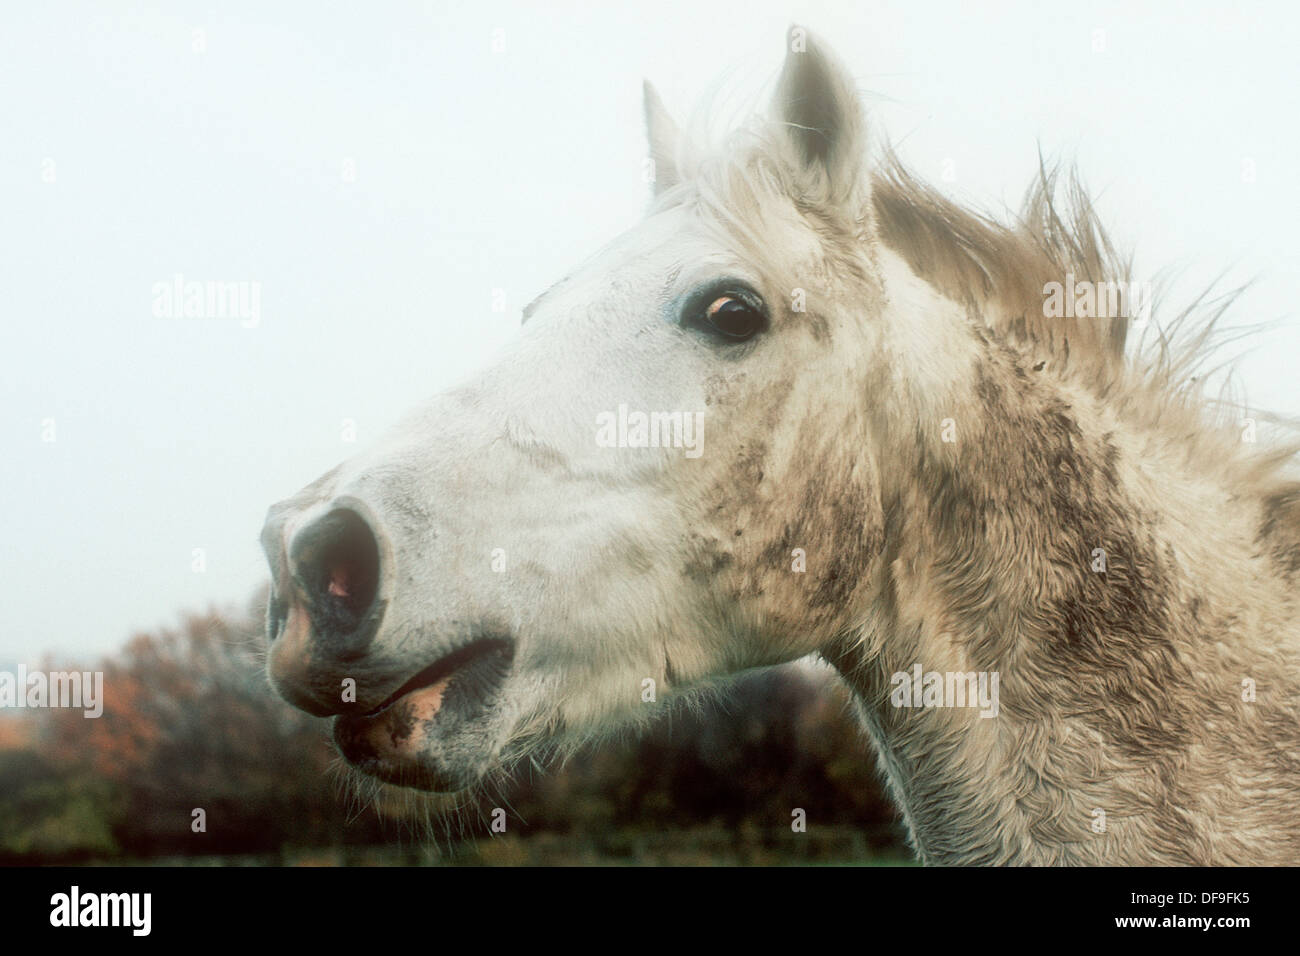 Horse whinnying Stock Photo